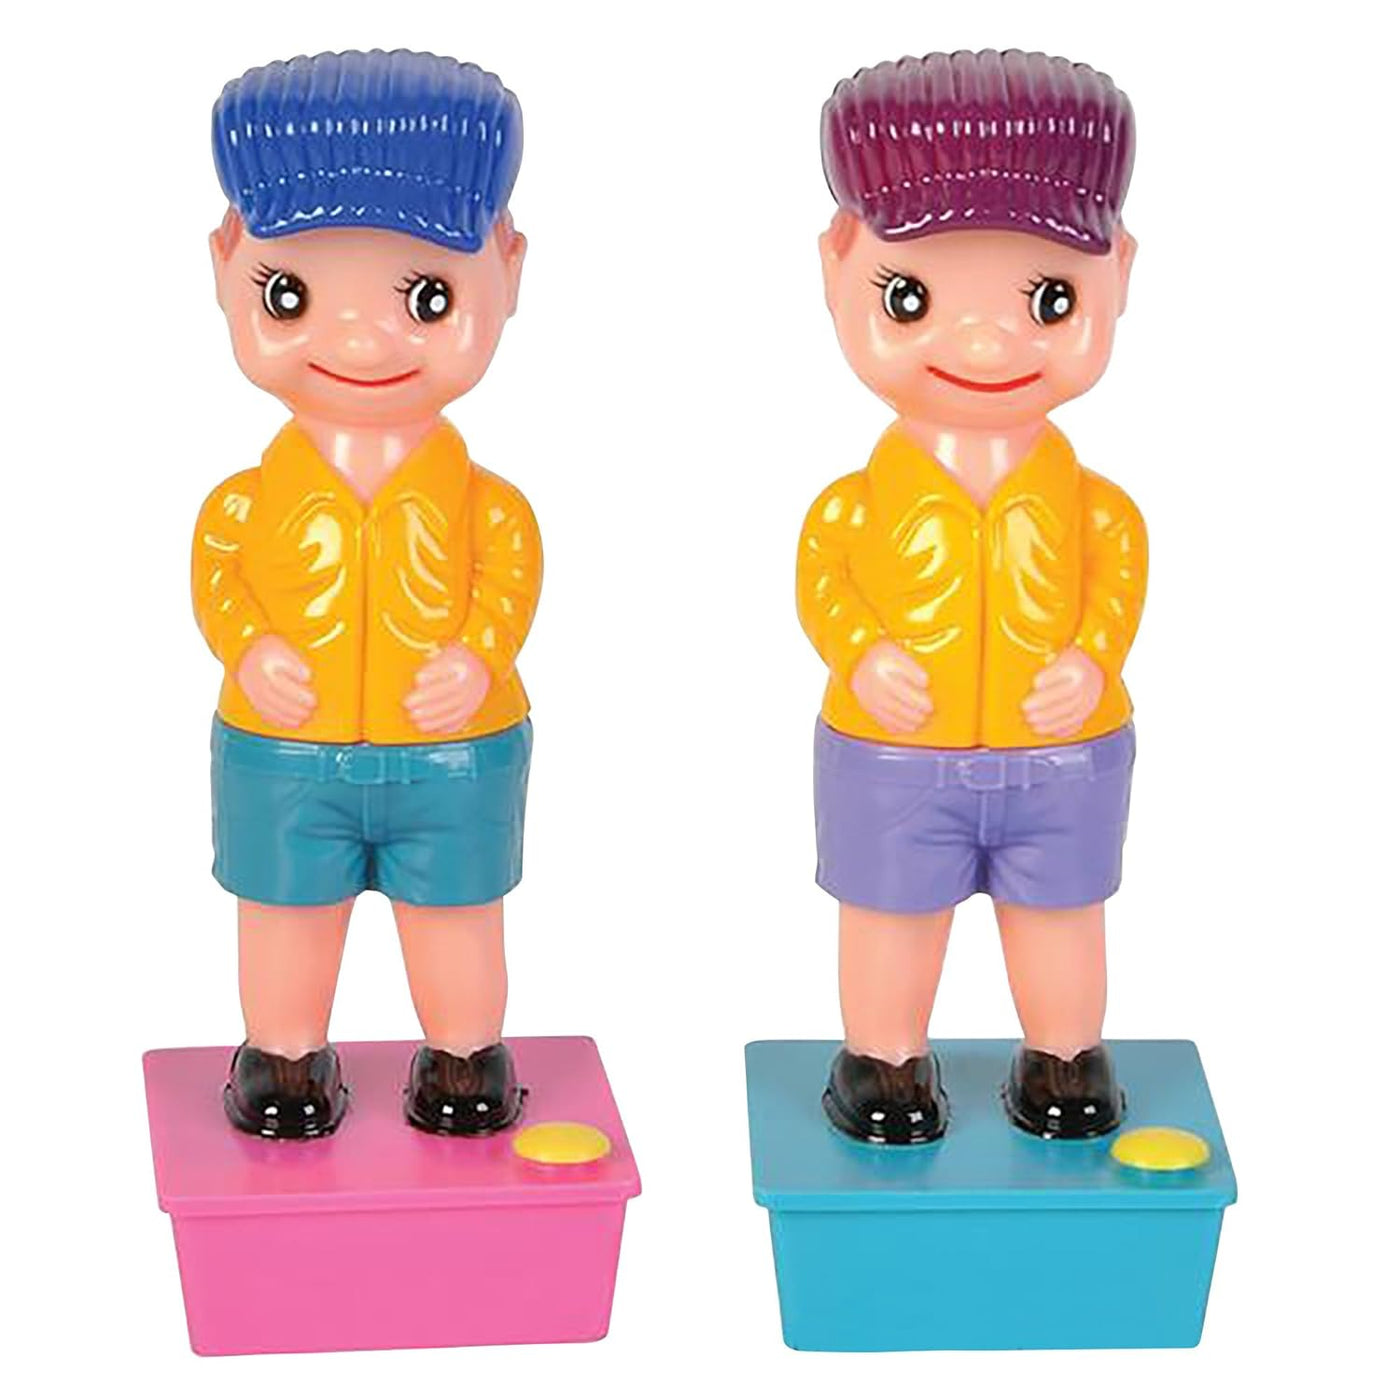 ArtCreativity Squirt Wee Boy Set Pack of 2-7.5 inch Boy Squirter Toys - Leak-Free Water Base - Classic Funny Novelty Gag Gift for Men, Women, Kids - Multicolor